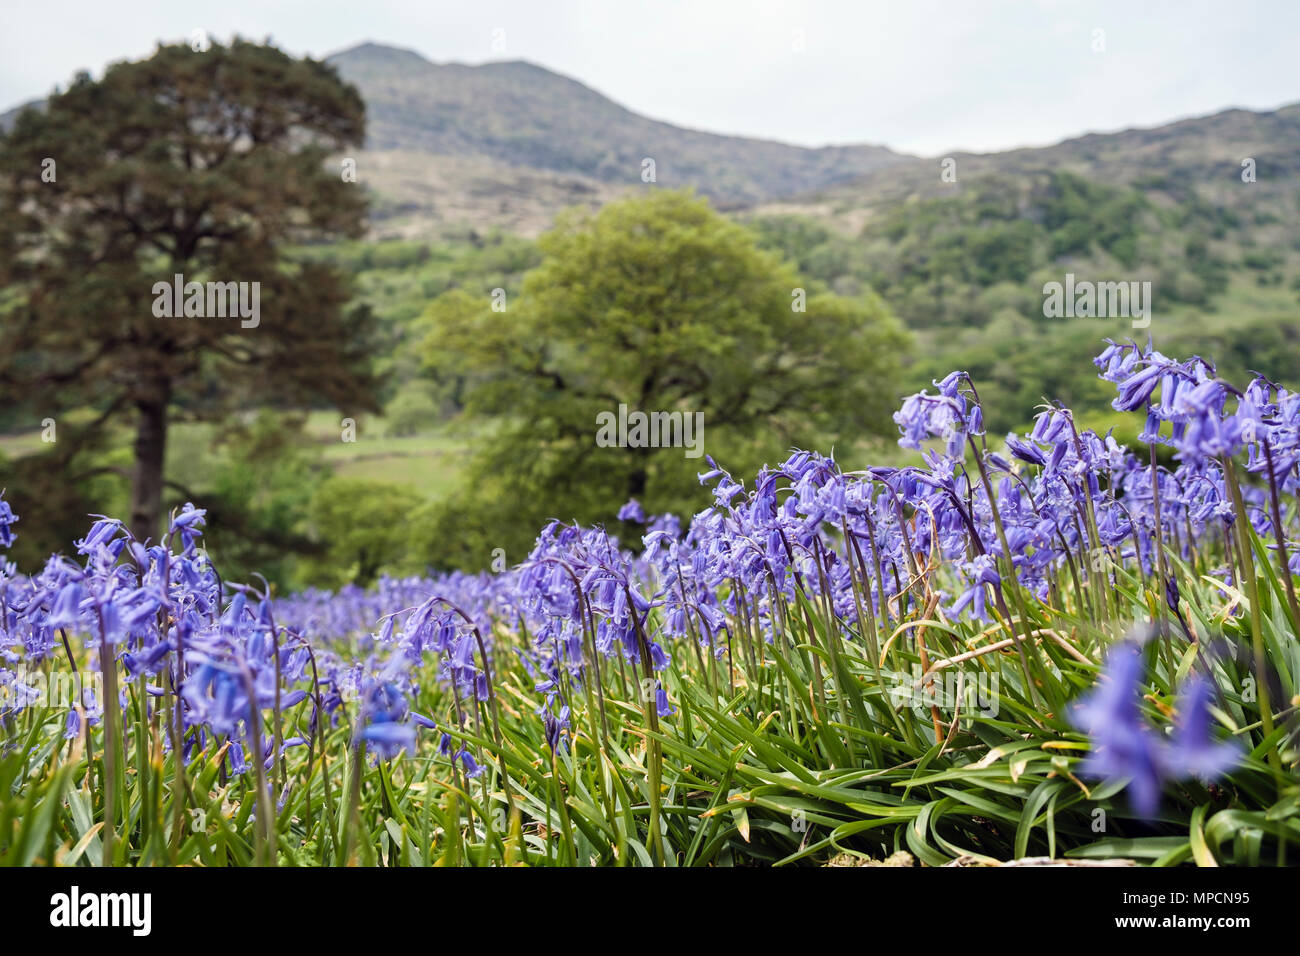 Stunning view of Bluebells growing on an open hillside in Snowdonia National Park in late spring early summer. Nant Gwynant Gwynedd Wales UK Britain Stock Photo